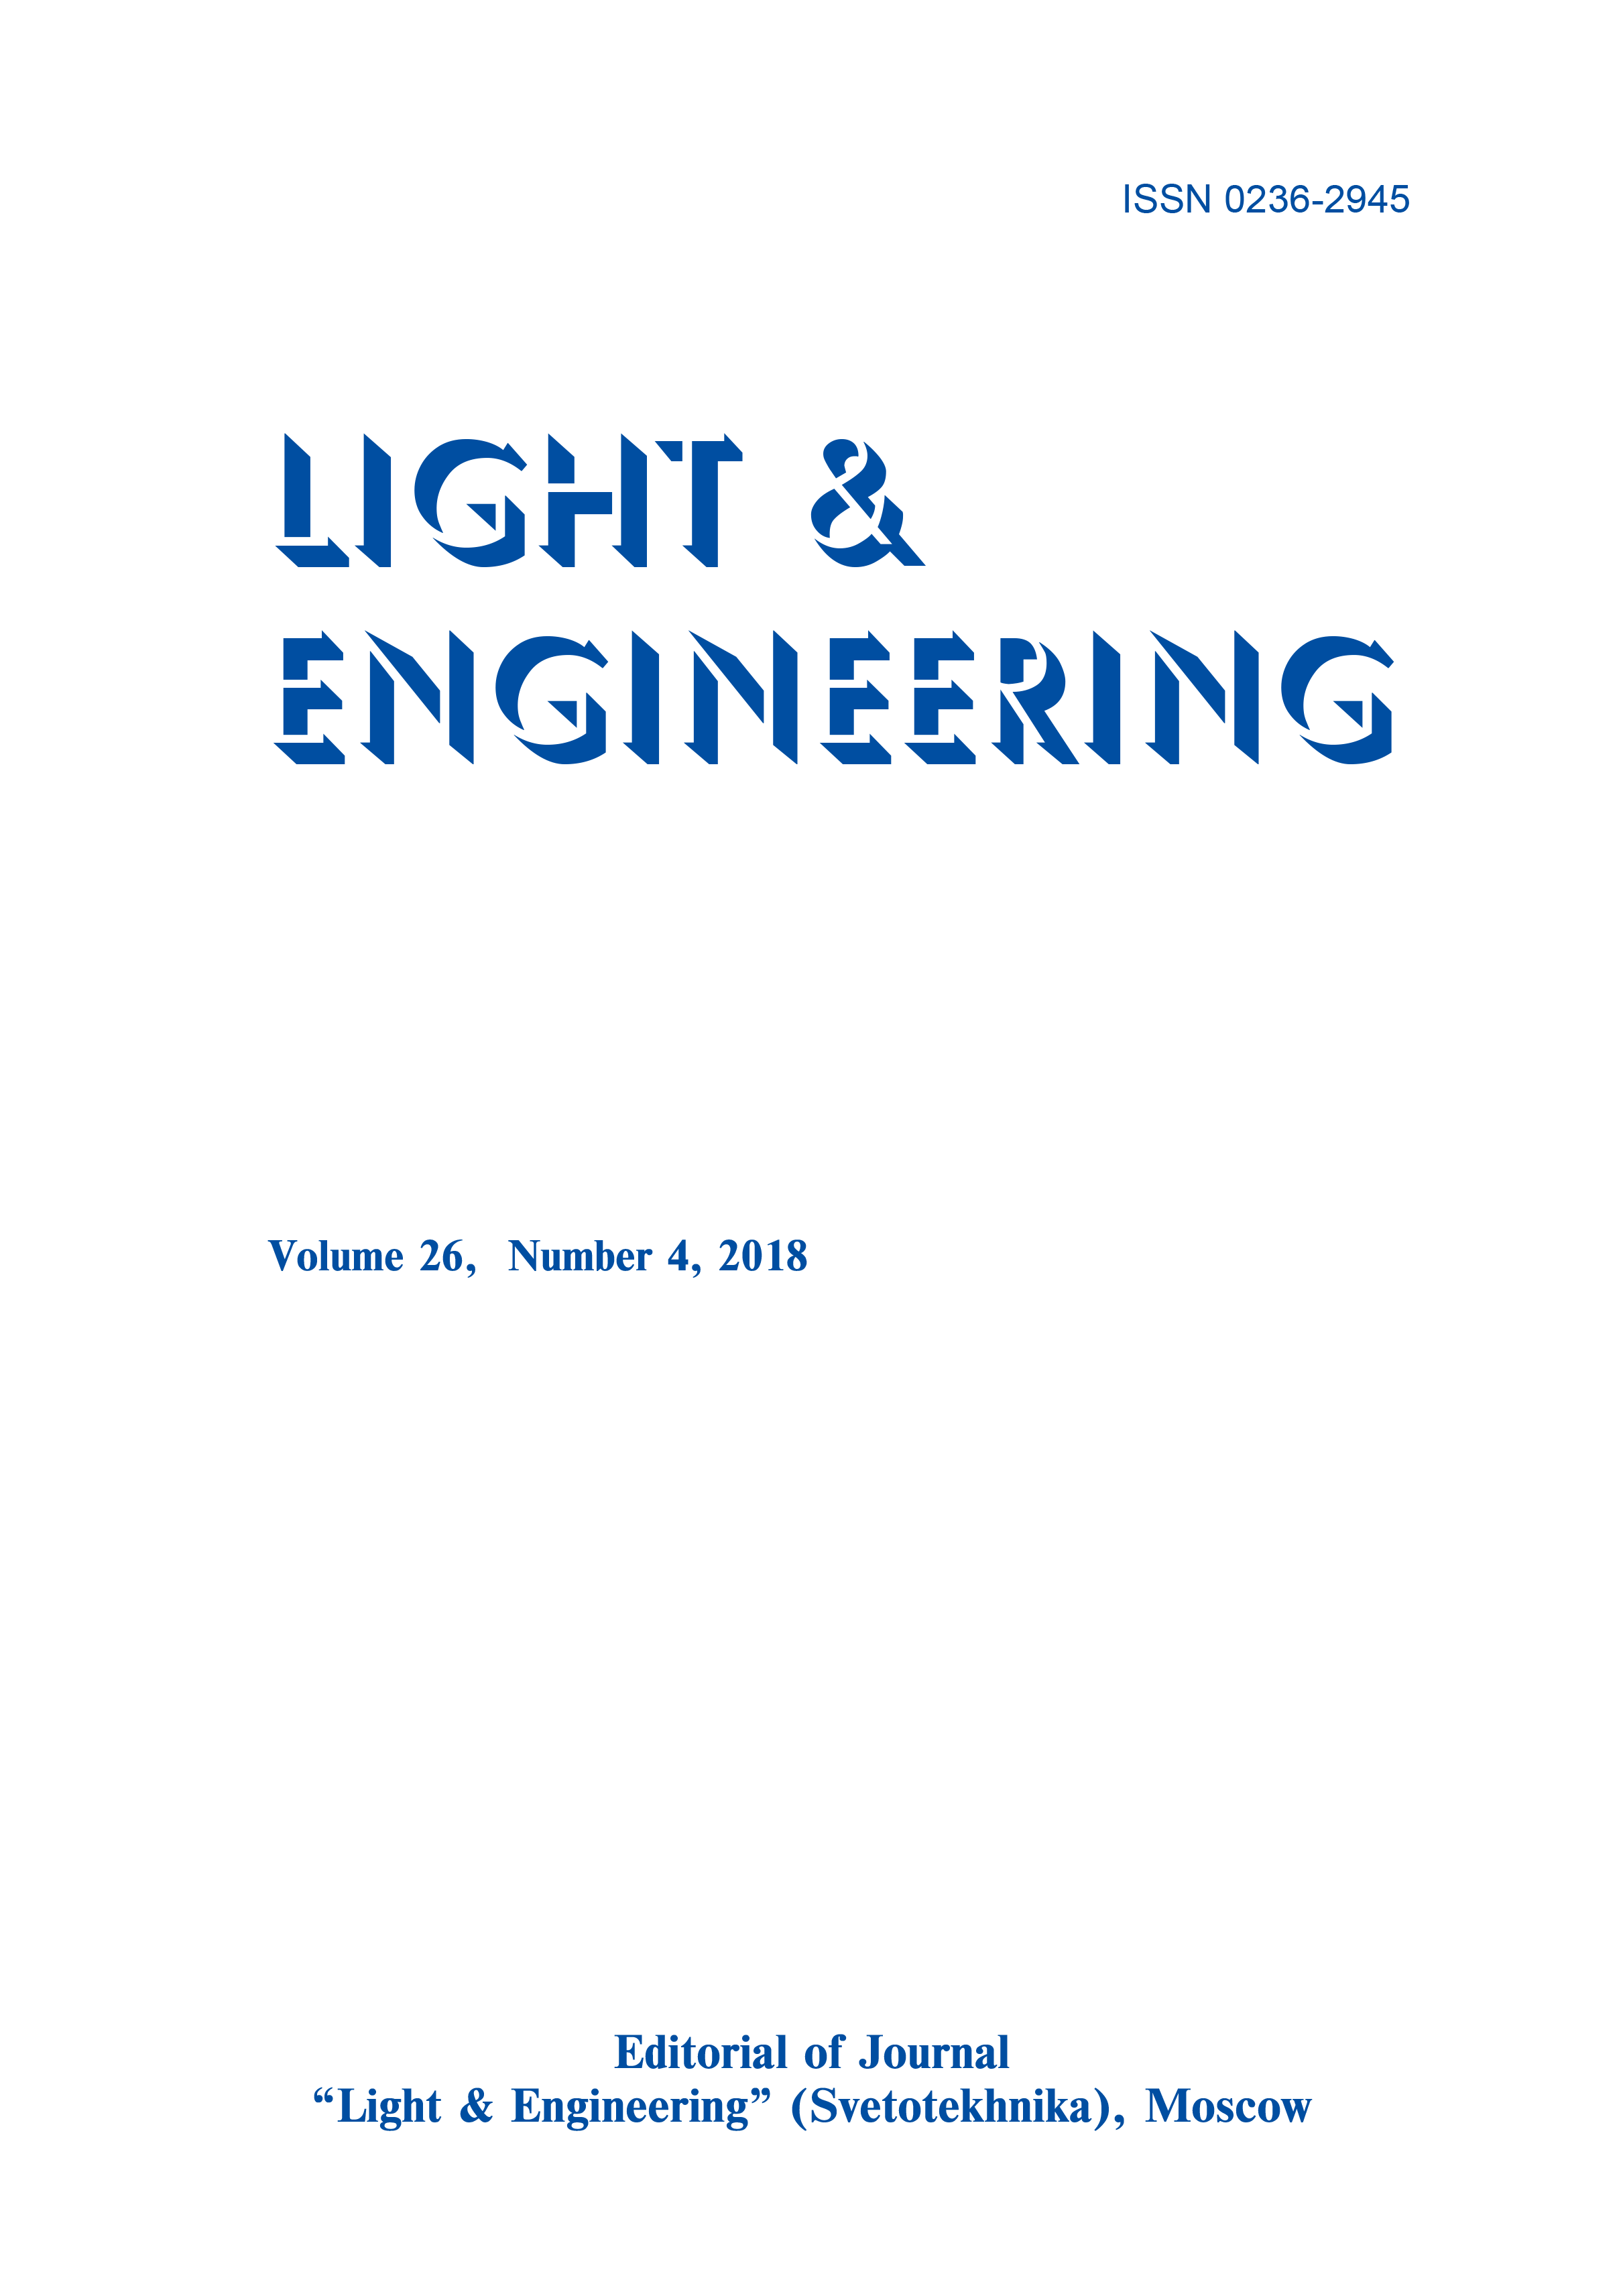 Features Choice of Light Sources for Bio-Technical Life Support Systems for Space Applications. L&E 26 (4) 2018